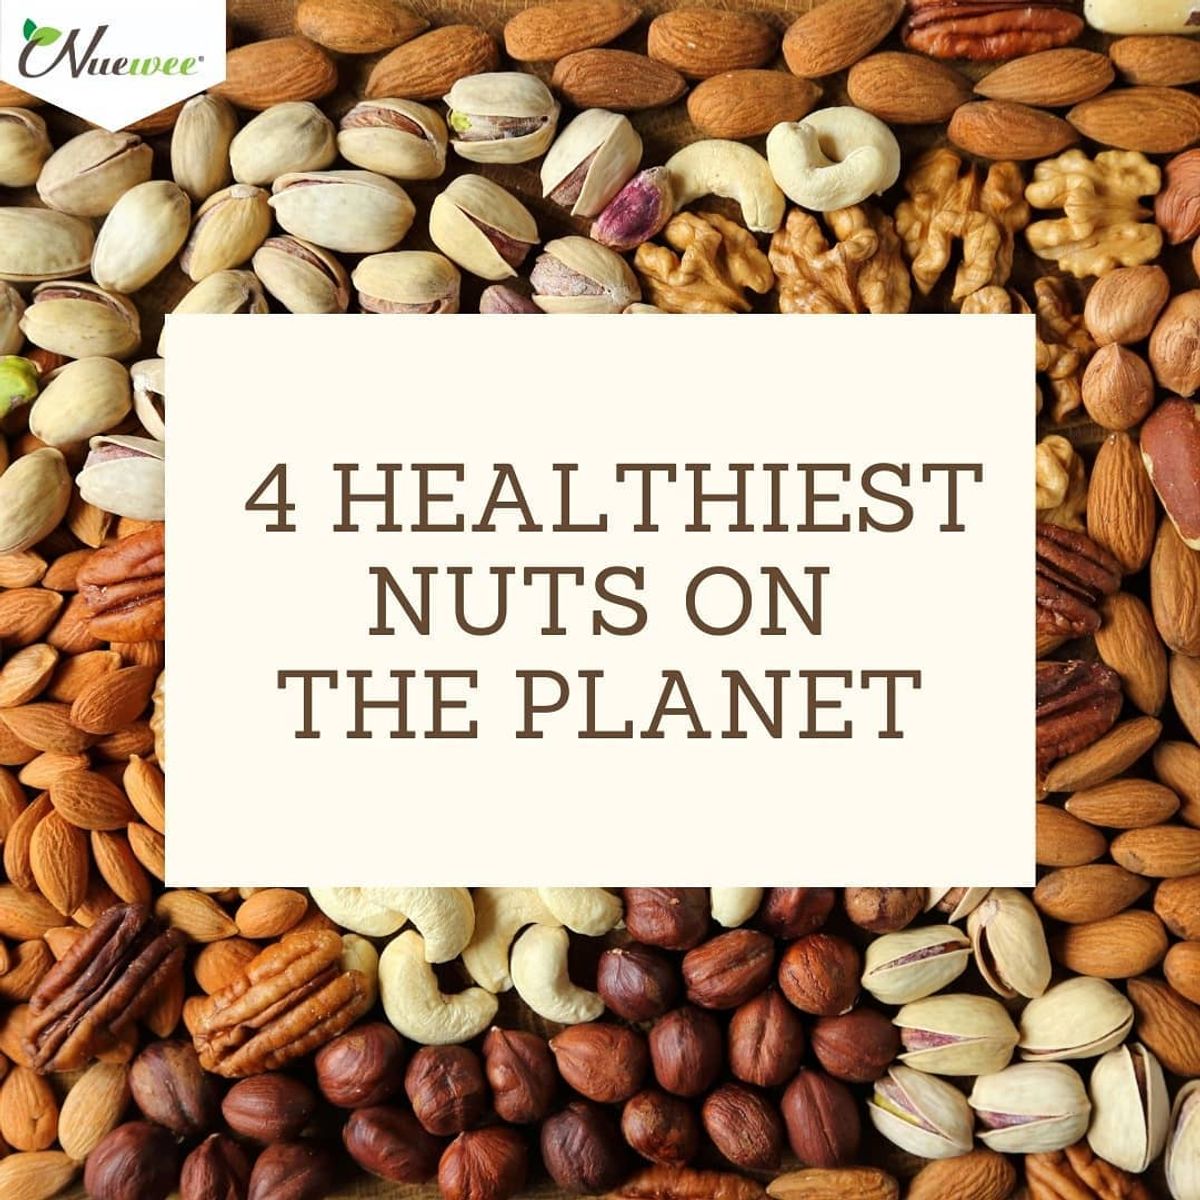 4 HEALTHIEST NUTS ON THE PLANET